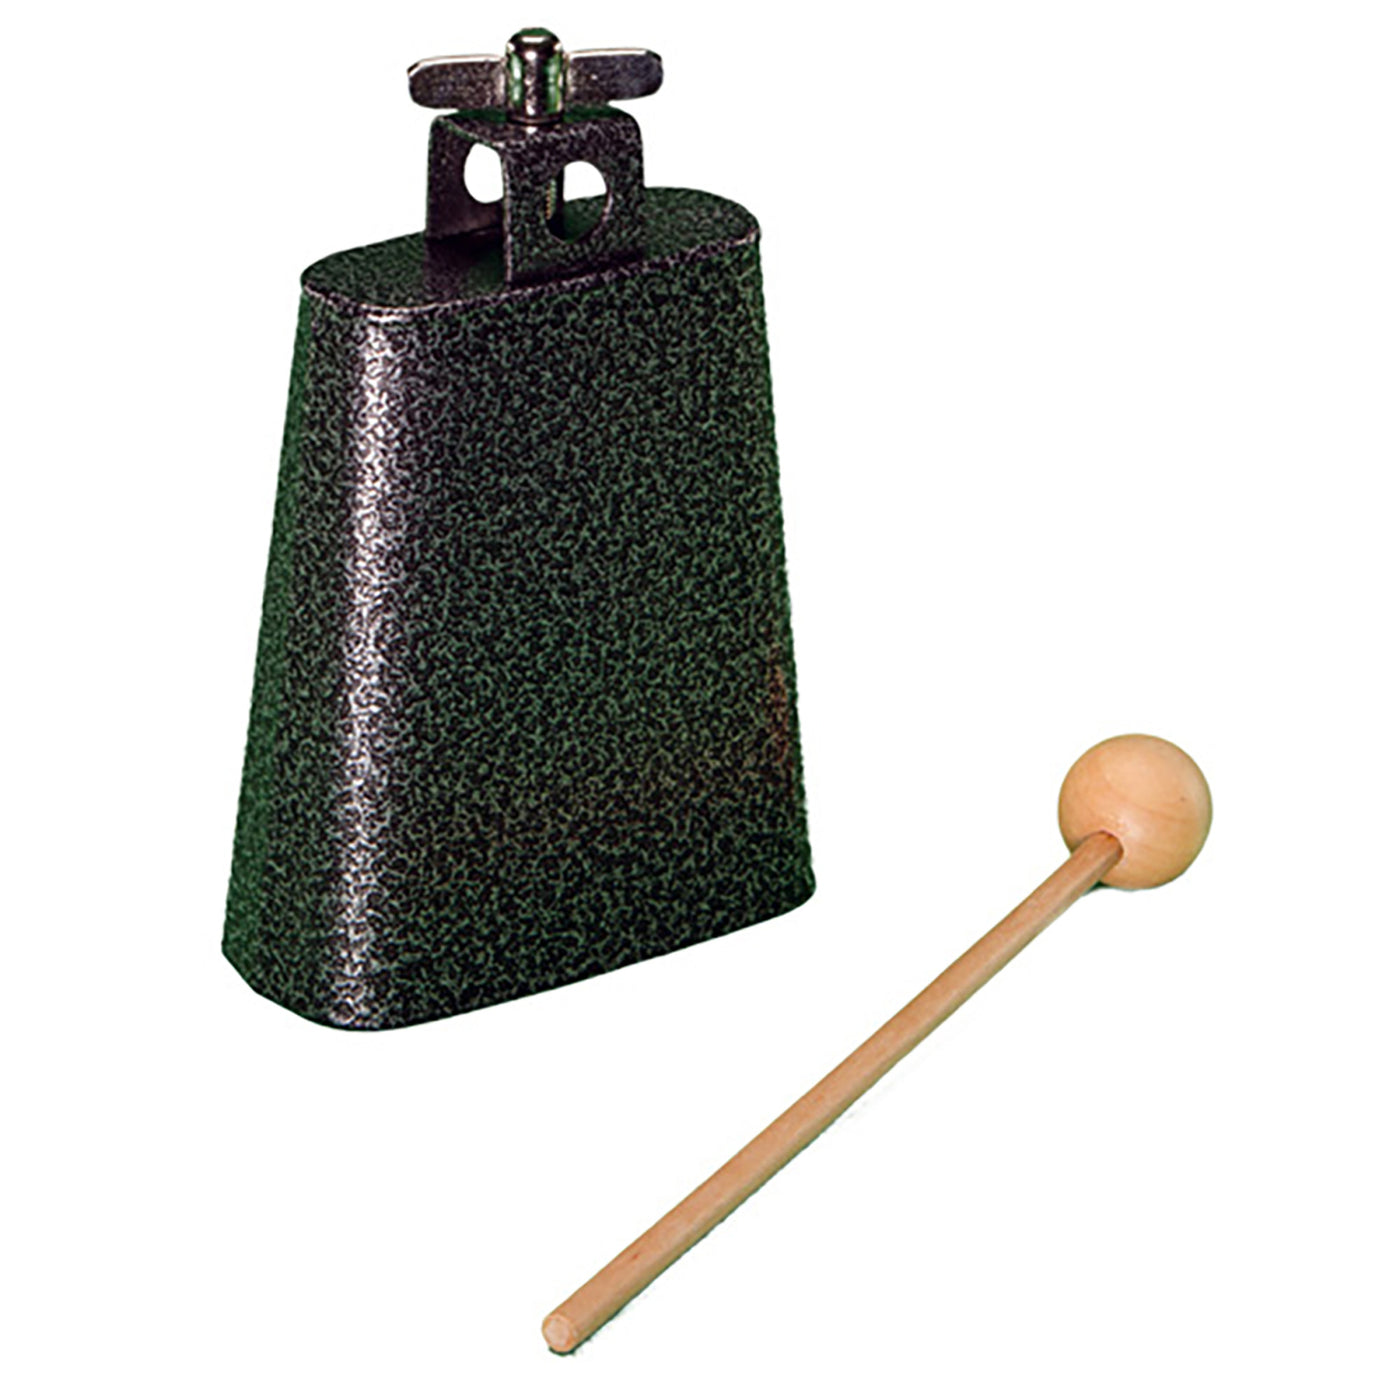 Rhythm Band 4.5" Cowbell, Mallet Included